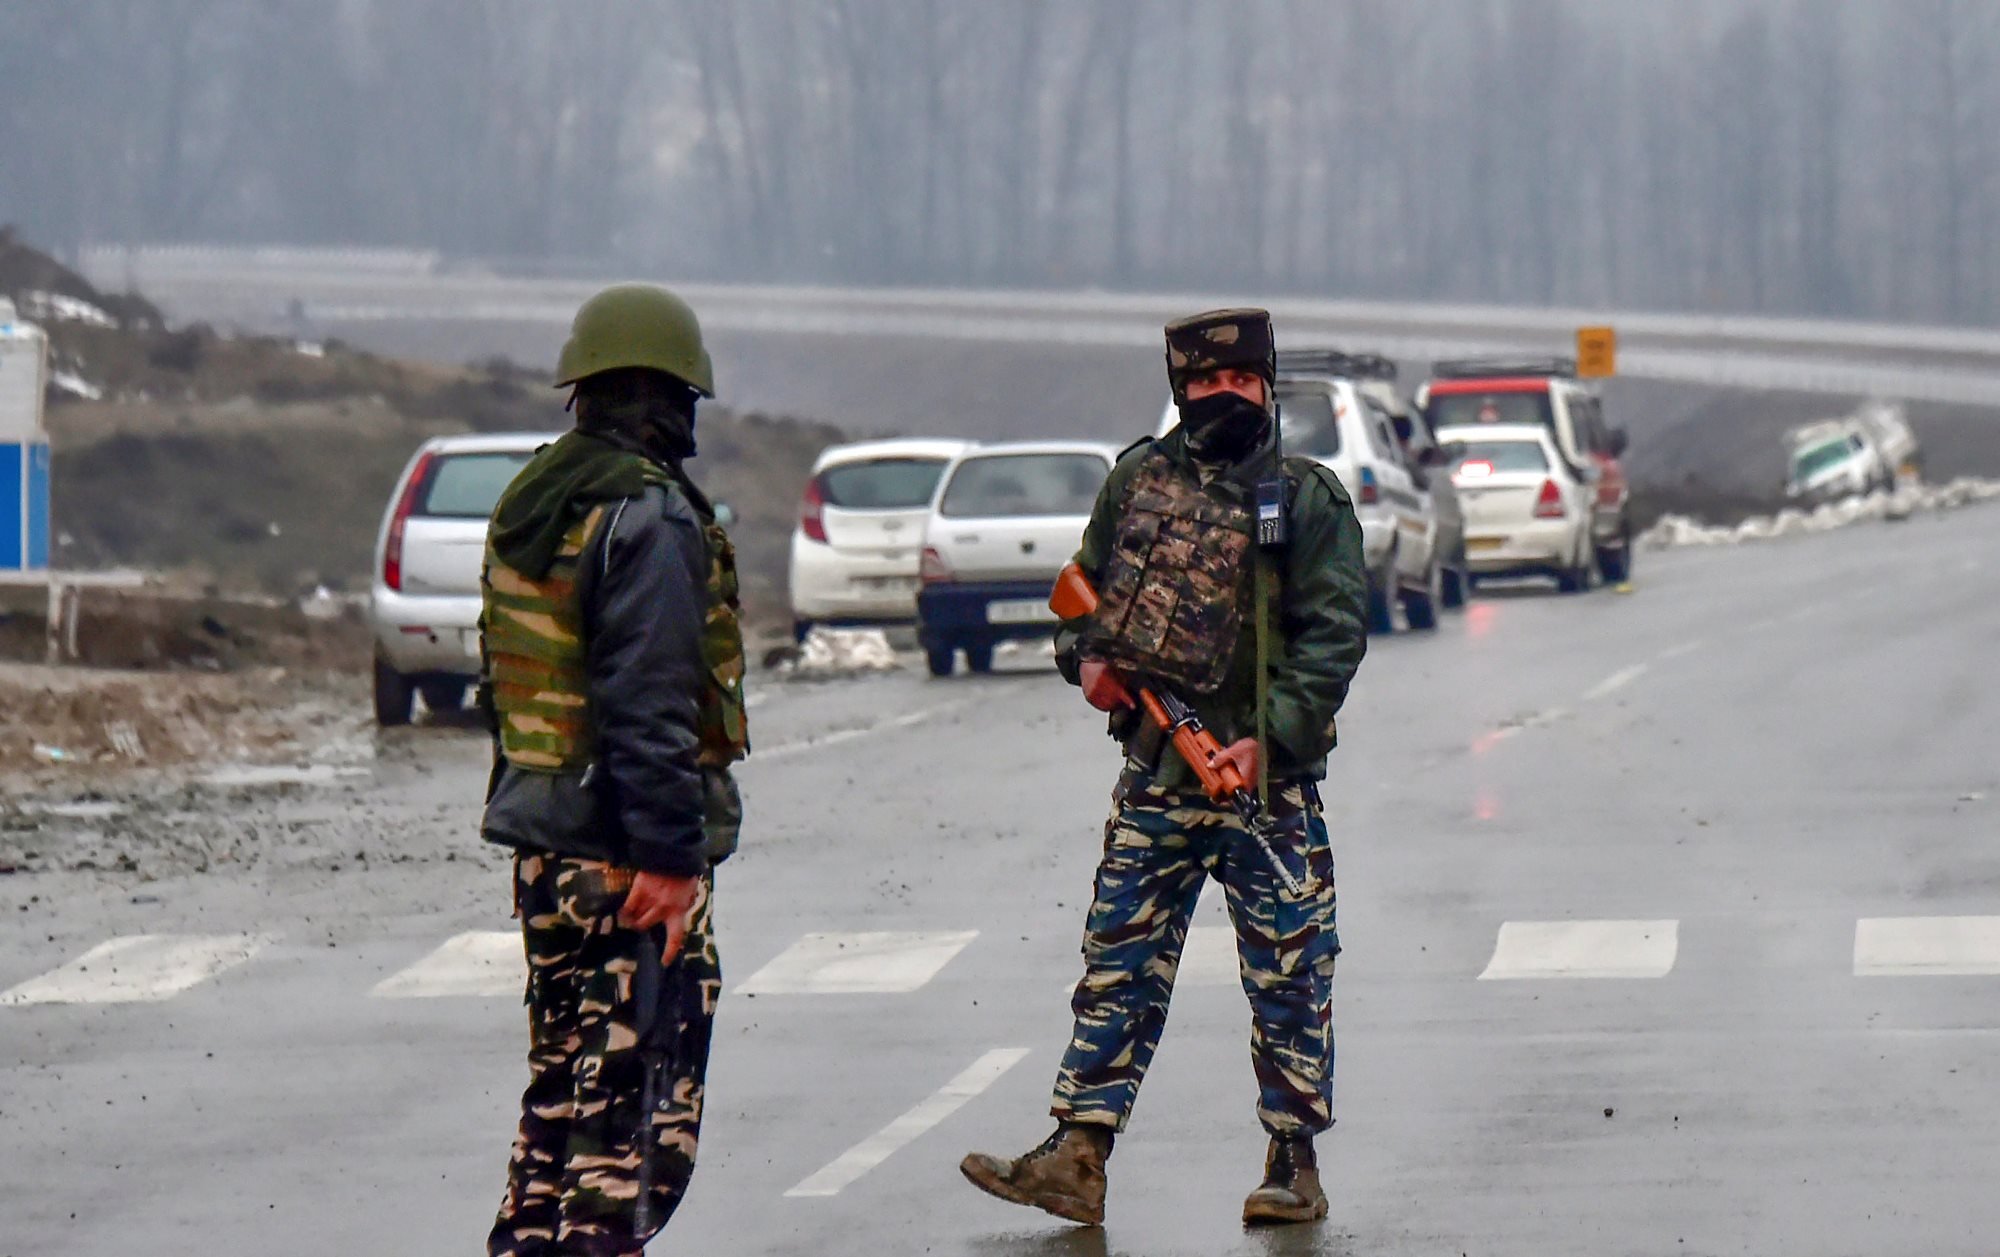 Awantipora: Army soldiers stand guard near the site of suicide bomb attack at Lathepora Awantipora in Pulwama district of south Kashmir, Thursday, February 14, 2019. At least 30 CRPF jawans were killed and dozens other injured when a CRPF convoy was attacked. (PTI Photo/S Irfan) (PTI2_14_2019_000155B)